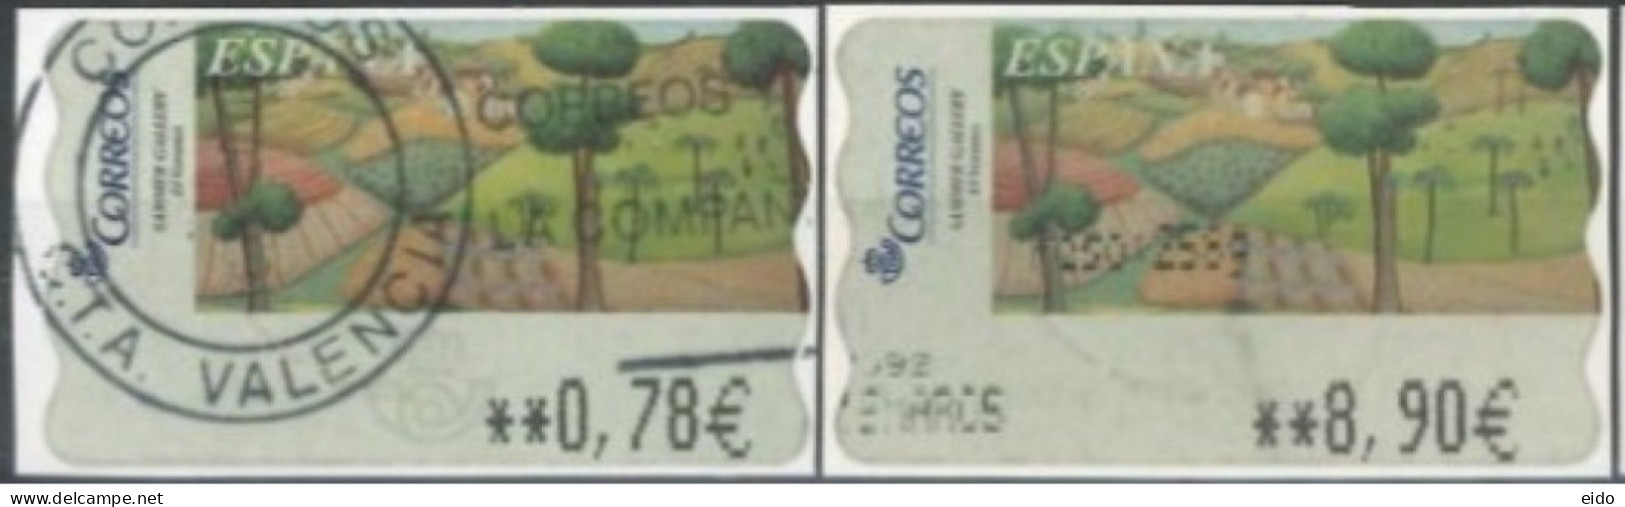 SPAIN - 2005 -  SAMER GALLERY, VERANO STAMPS LABELS SET OF 2 OF DIFFERENT VALUES, USED . - Oblitérés